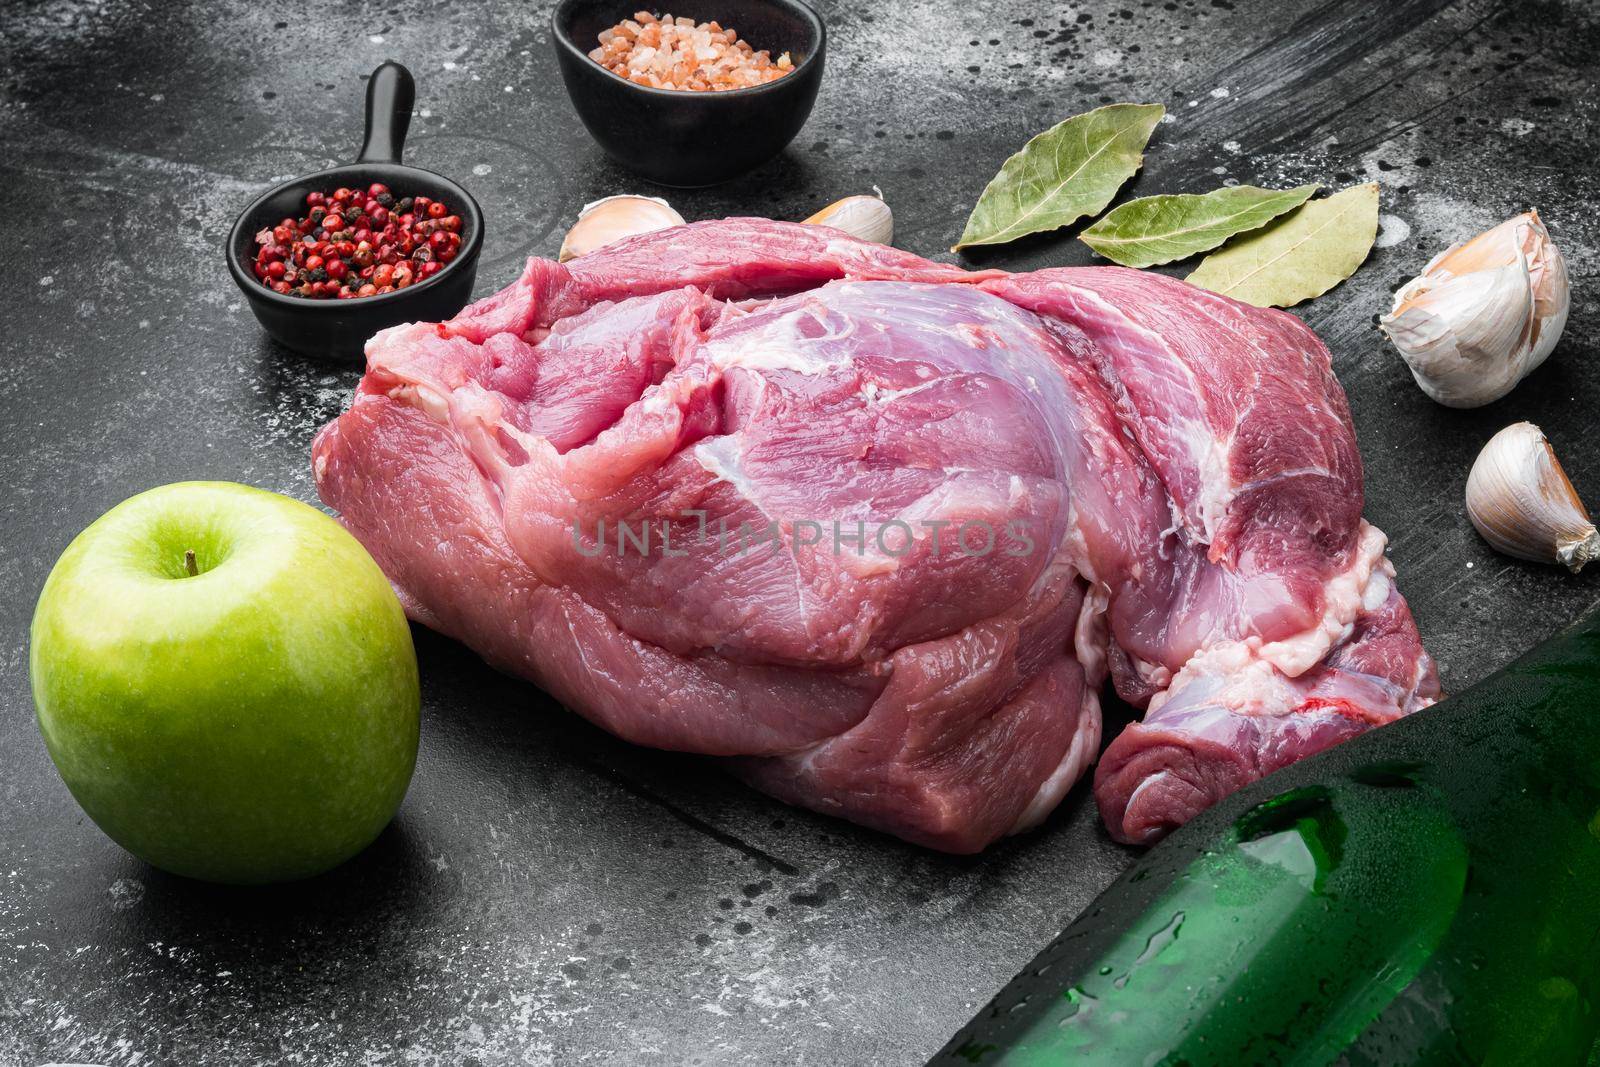 Pork roast ingredients, with apple dry cider, on black dark stone table background by Ilianesolenyi